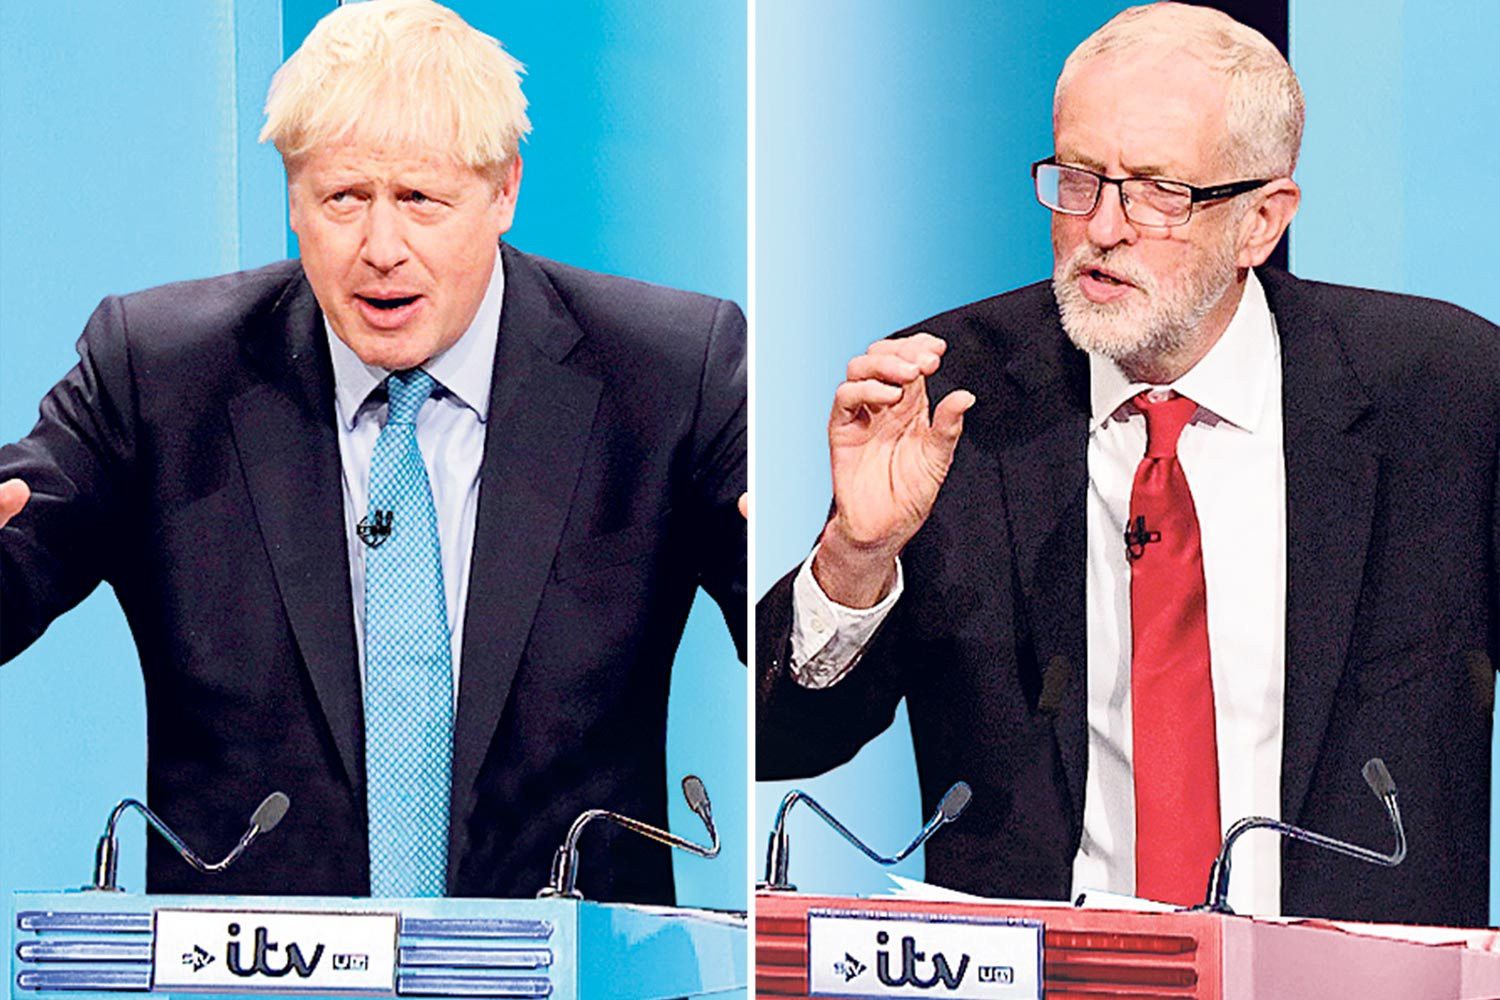  Our mock-up of Boris Johnson and Jeremy Corbyn going head-to-head in their live ITV clash planned for November 19